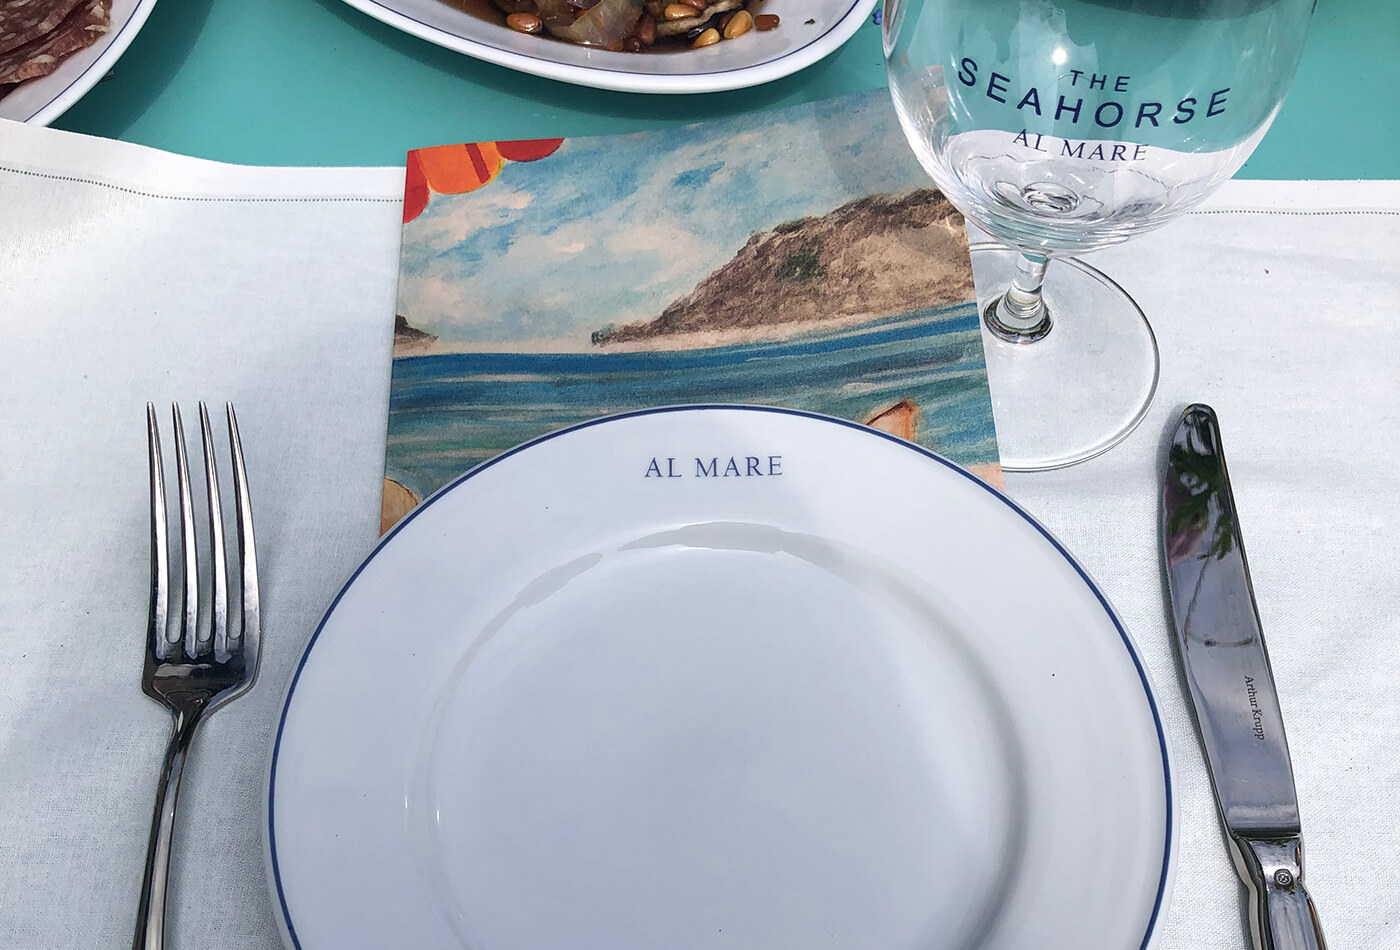 Seahorse Al Mare table setup with branded plate and glass.